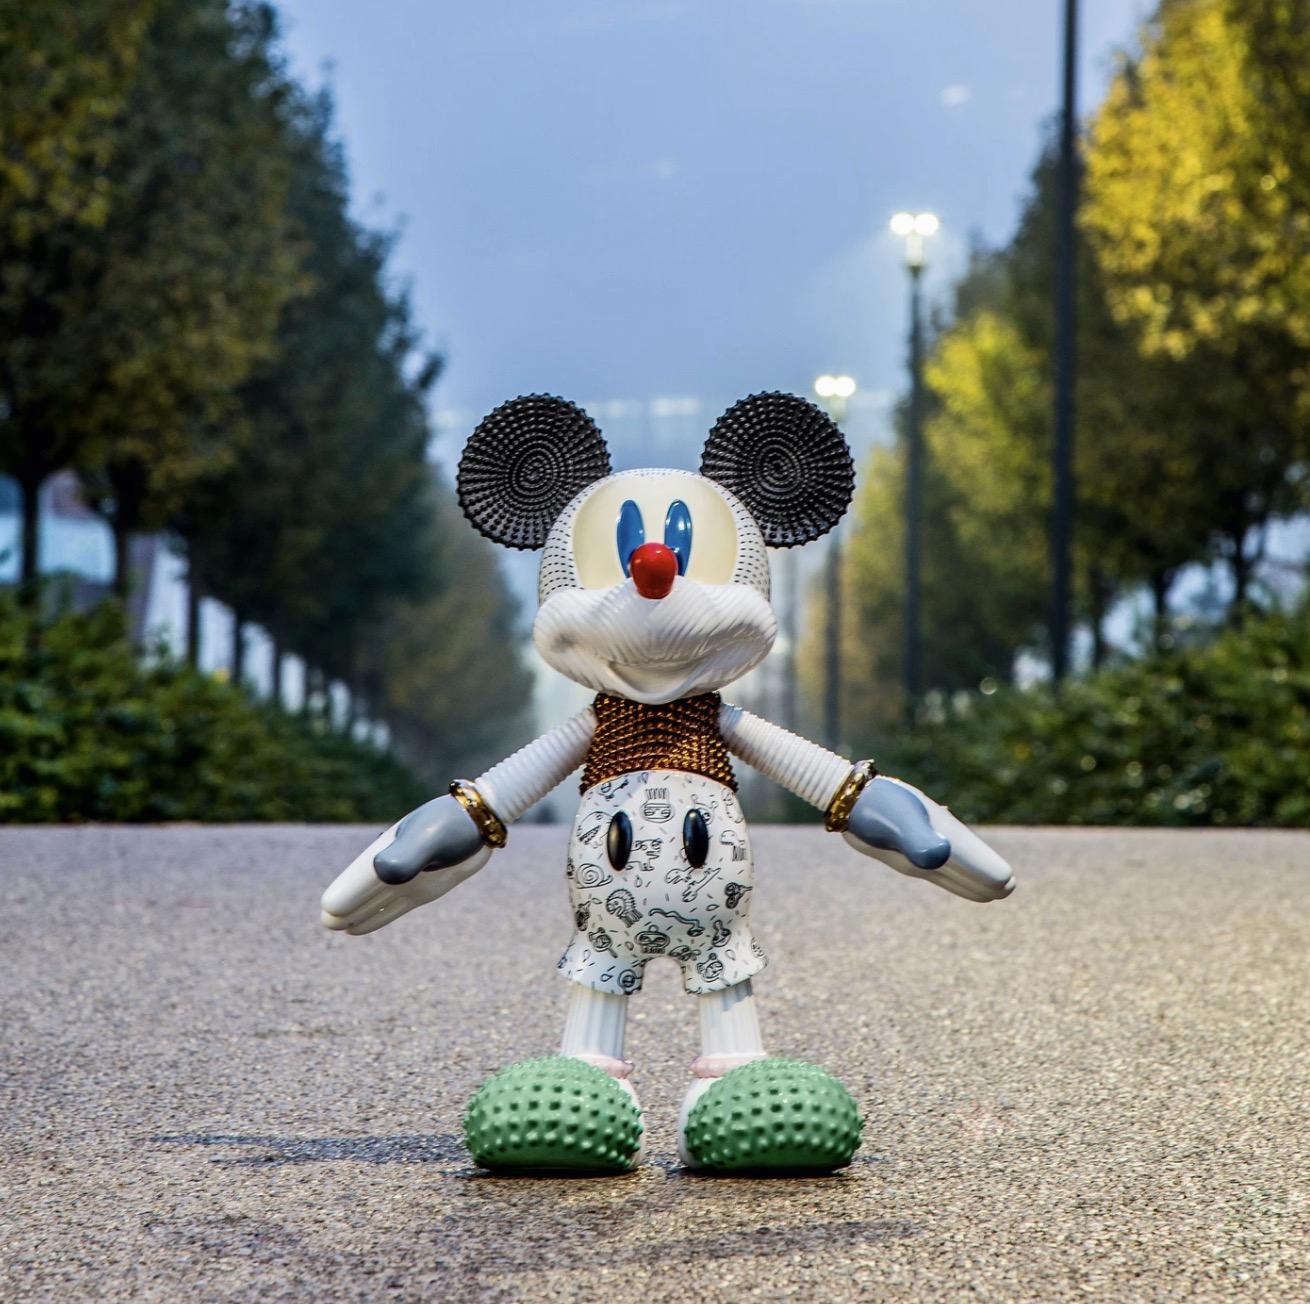 Mickey Forever Young designed by Elena Salmistraro for Bosa is a sculpture made of ceramic, born from the collaboration between Bosa and Disney to celebrate Mickey Mouse's 90th years anniversary.

Mickey Mouse limited edition sculpture, entirely